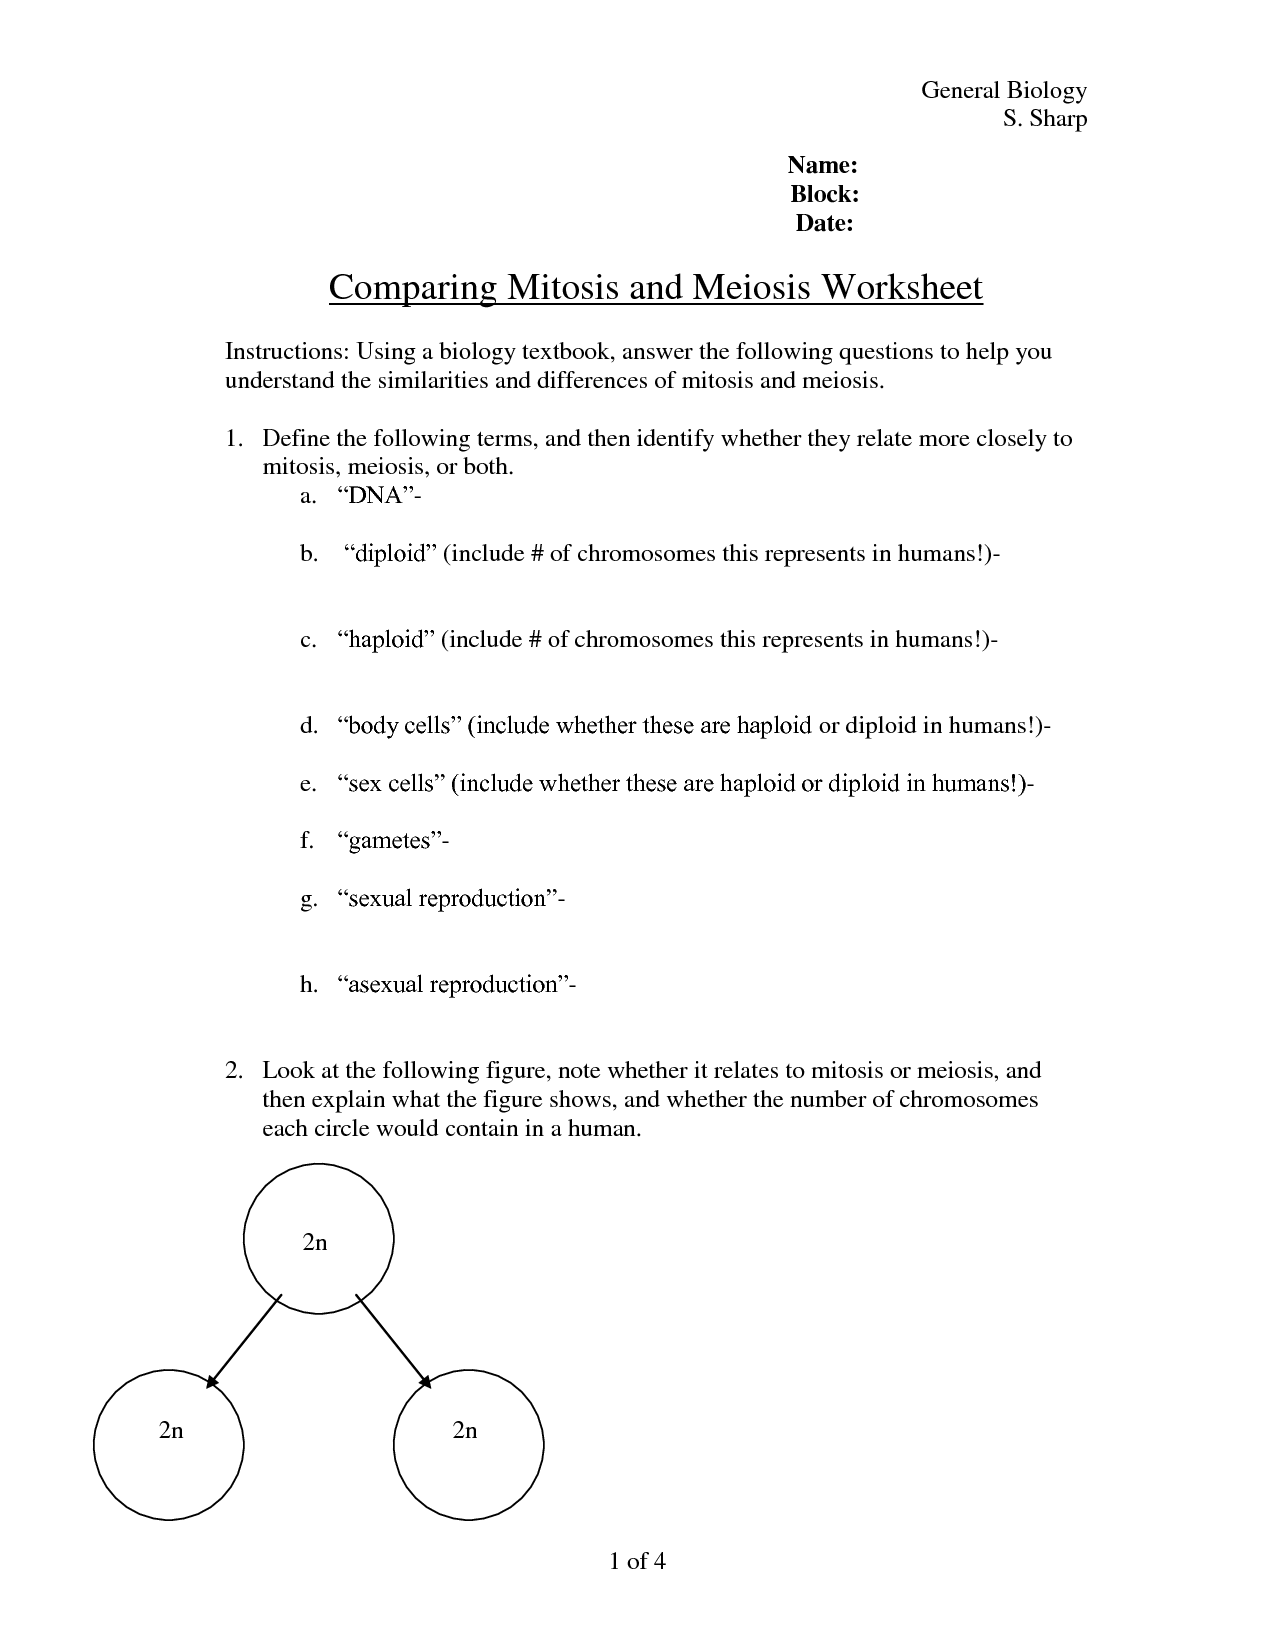 Compare Mitosis and Meiosis Worksheet Image